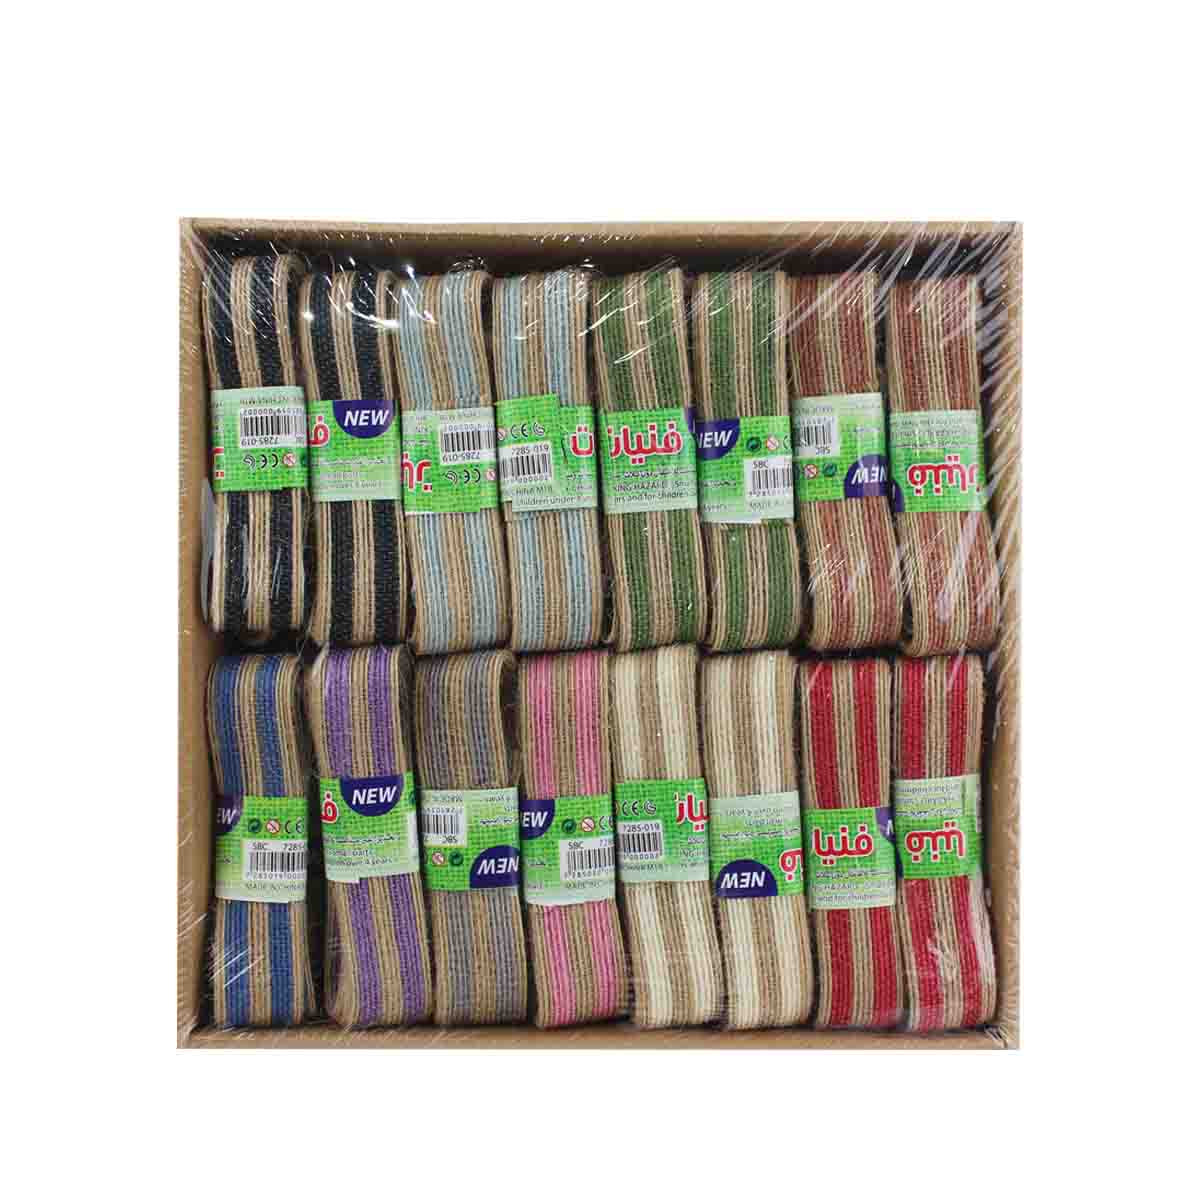 Shop Twine Ropes 6 Colors Tailoring Items online in Abu Dhabi, UAE